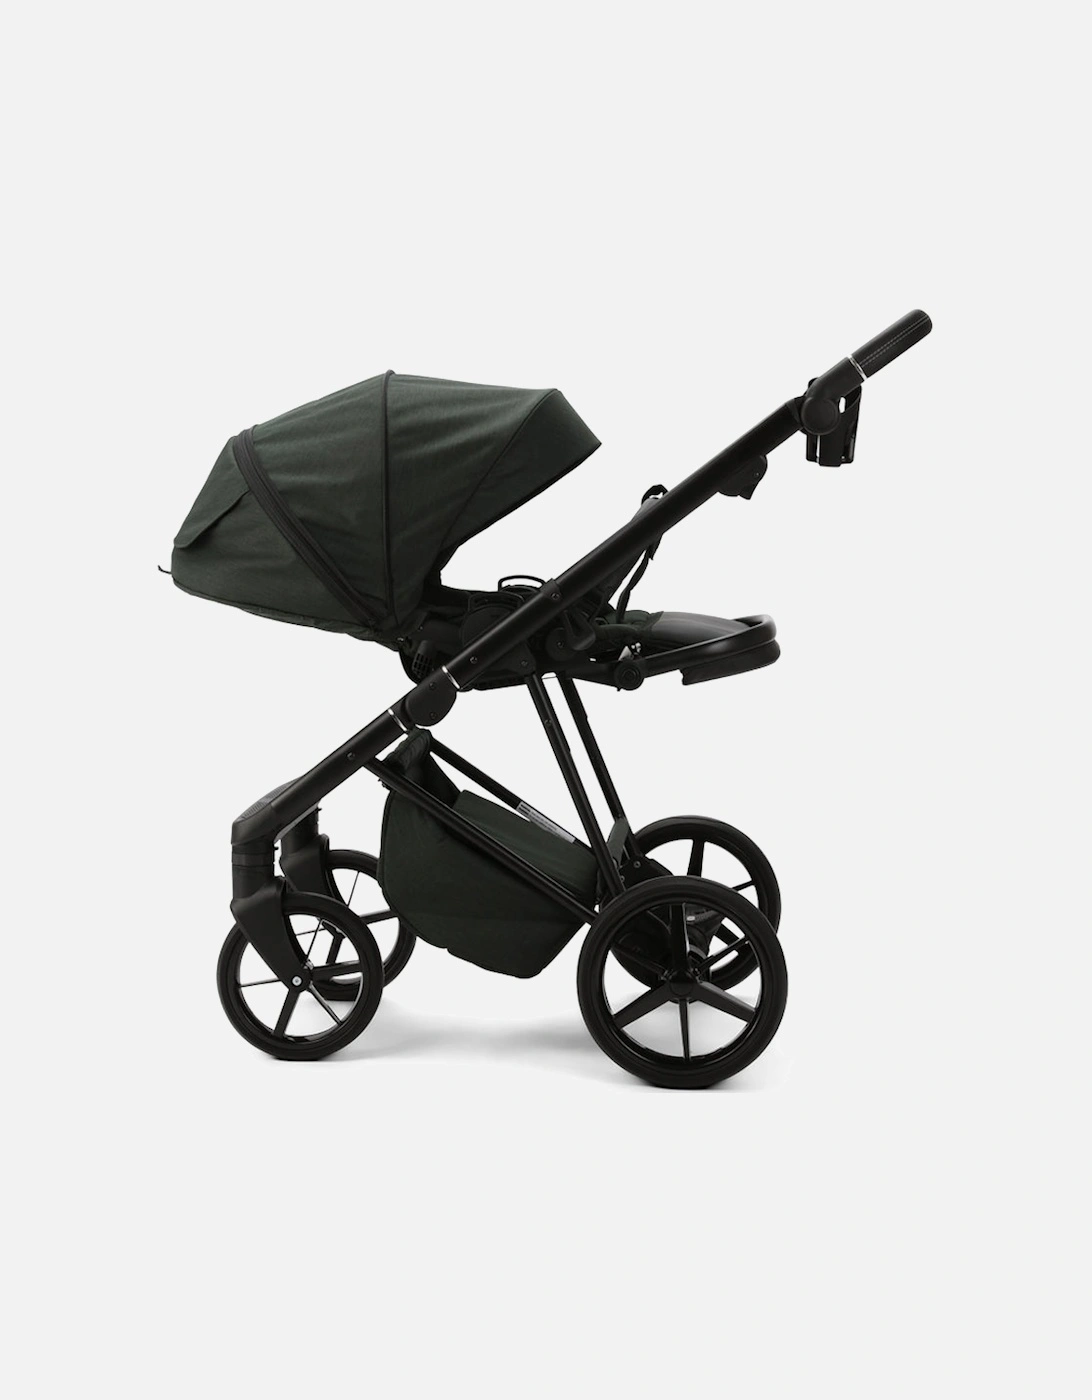 Milano Evo Green - Chassis, Carry Cot, Seat Unit & Accessories